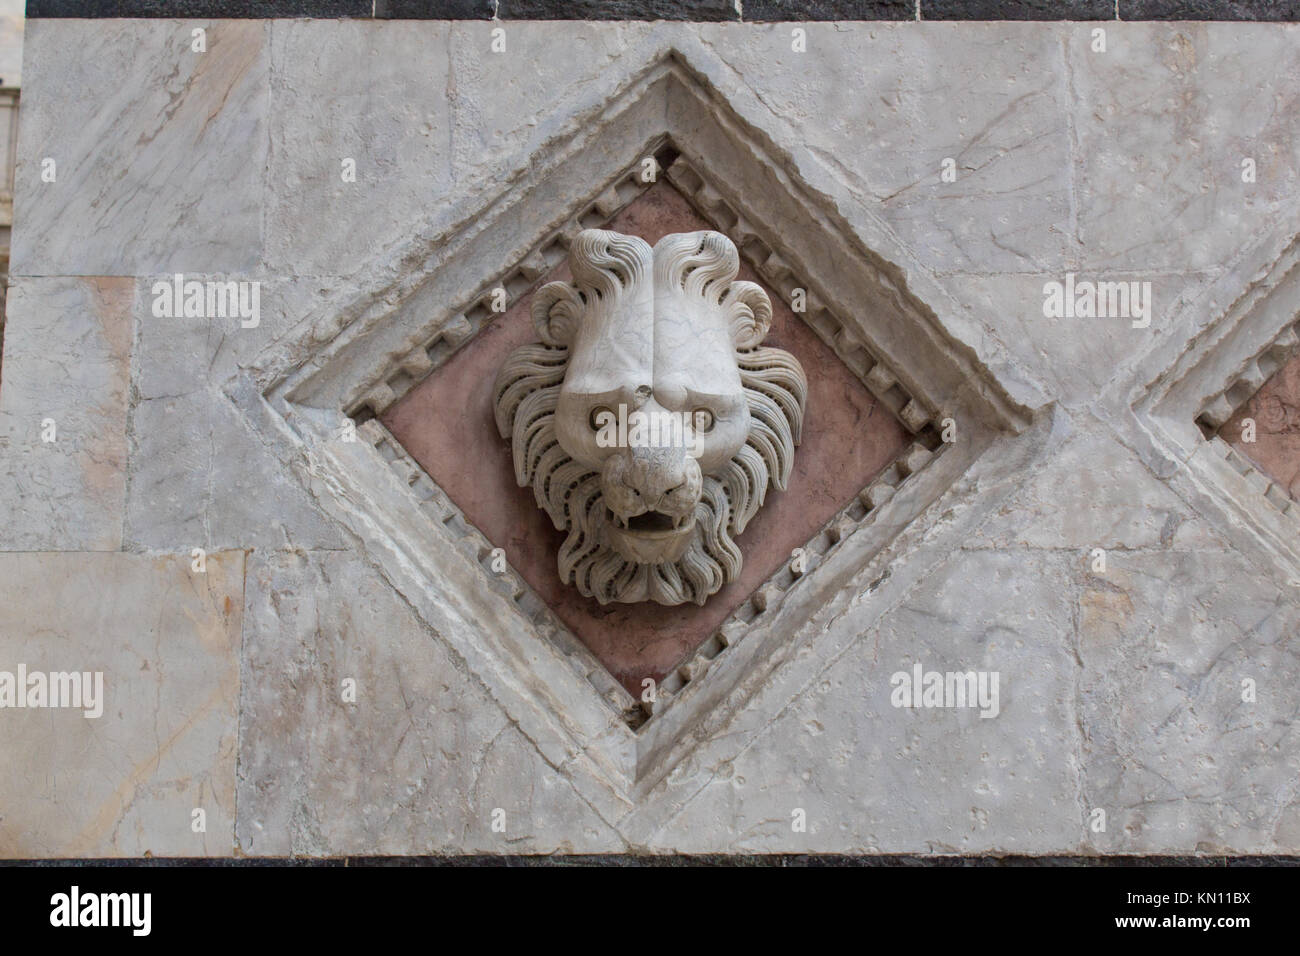 Carved lion's head exterior element on the Duomo di Siena. Stock Photo